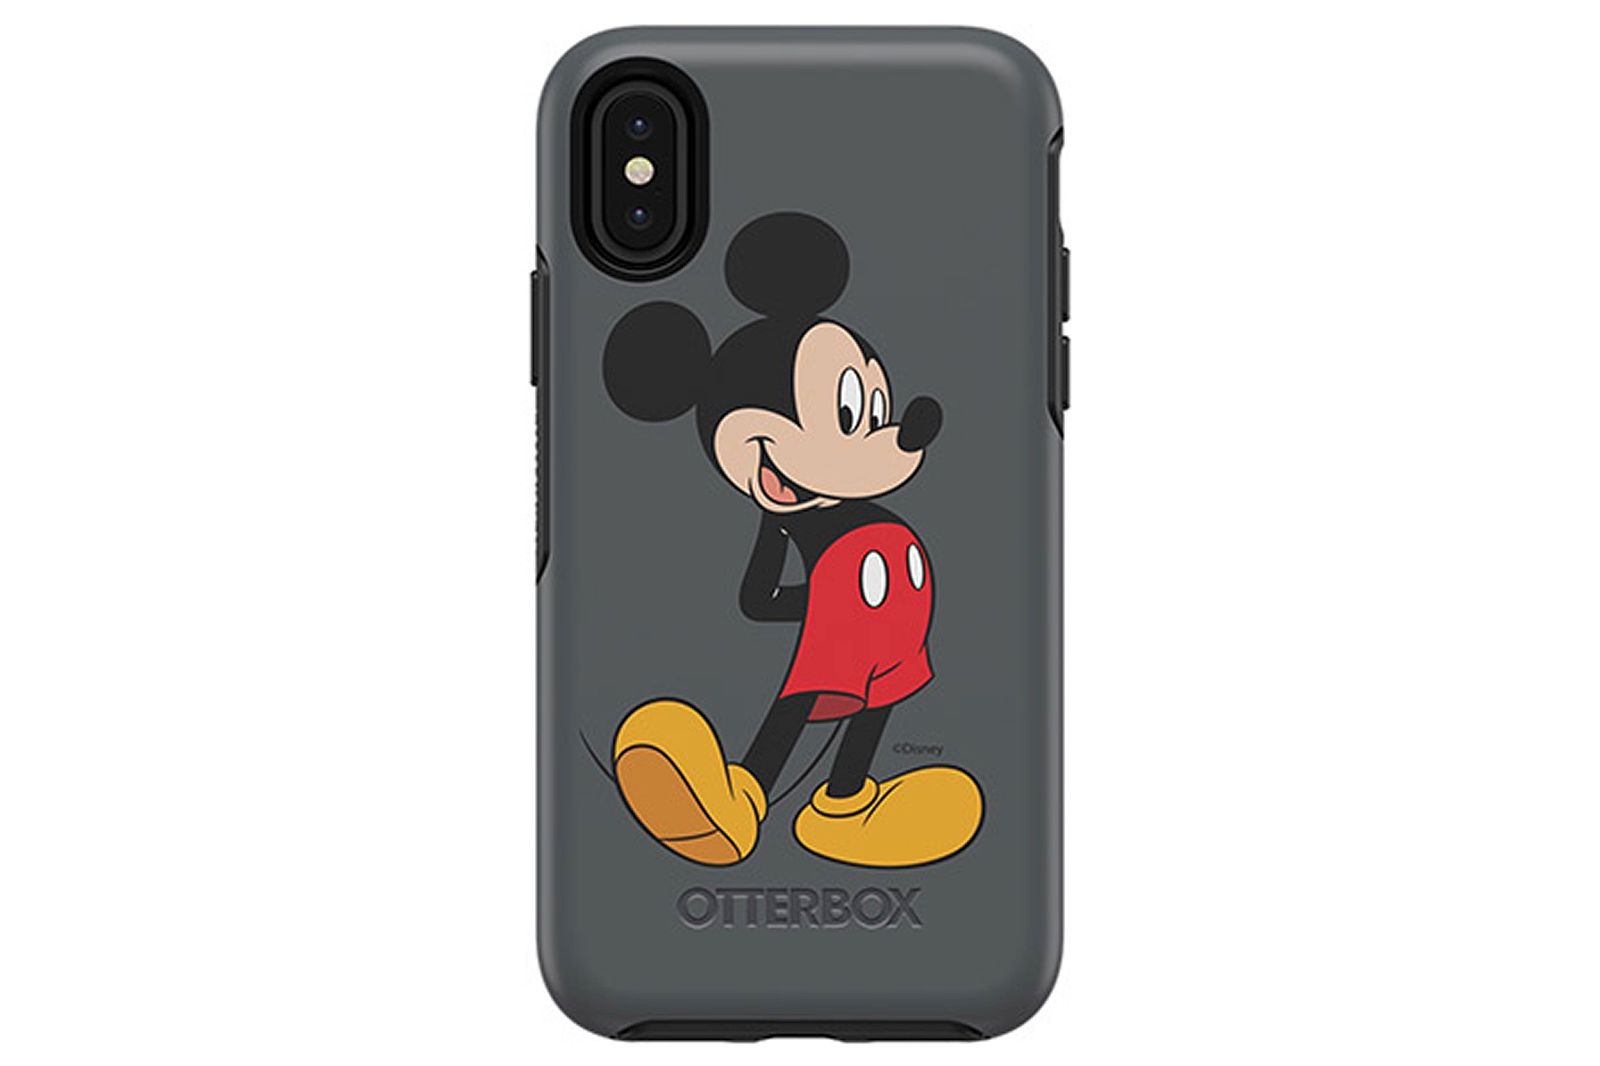 Best Disney Otterbox cases Protection fit for a Princess or a mouse image 8